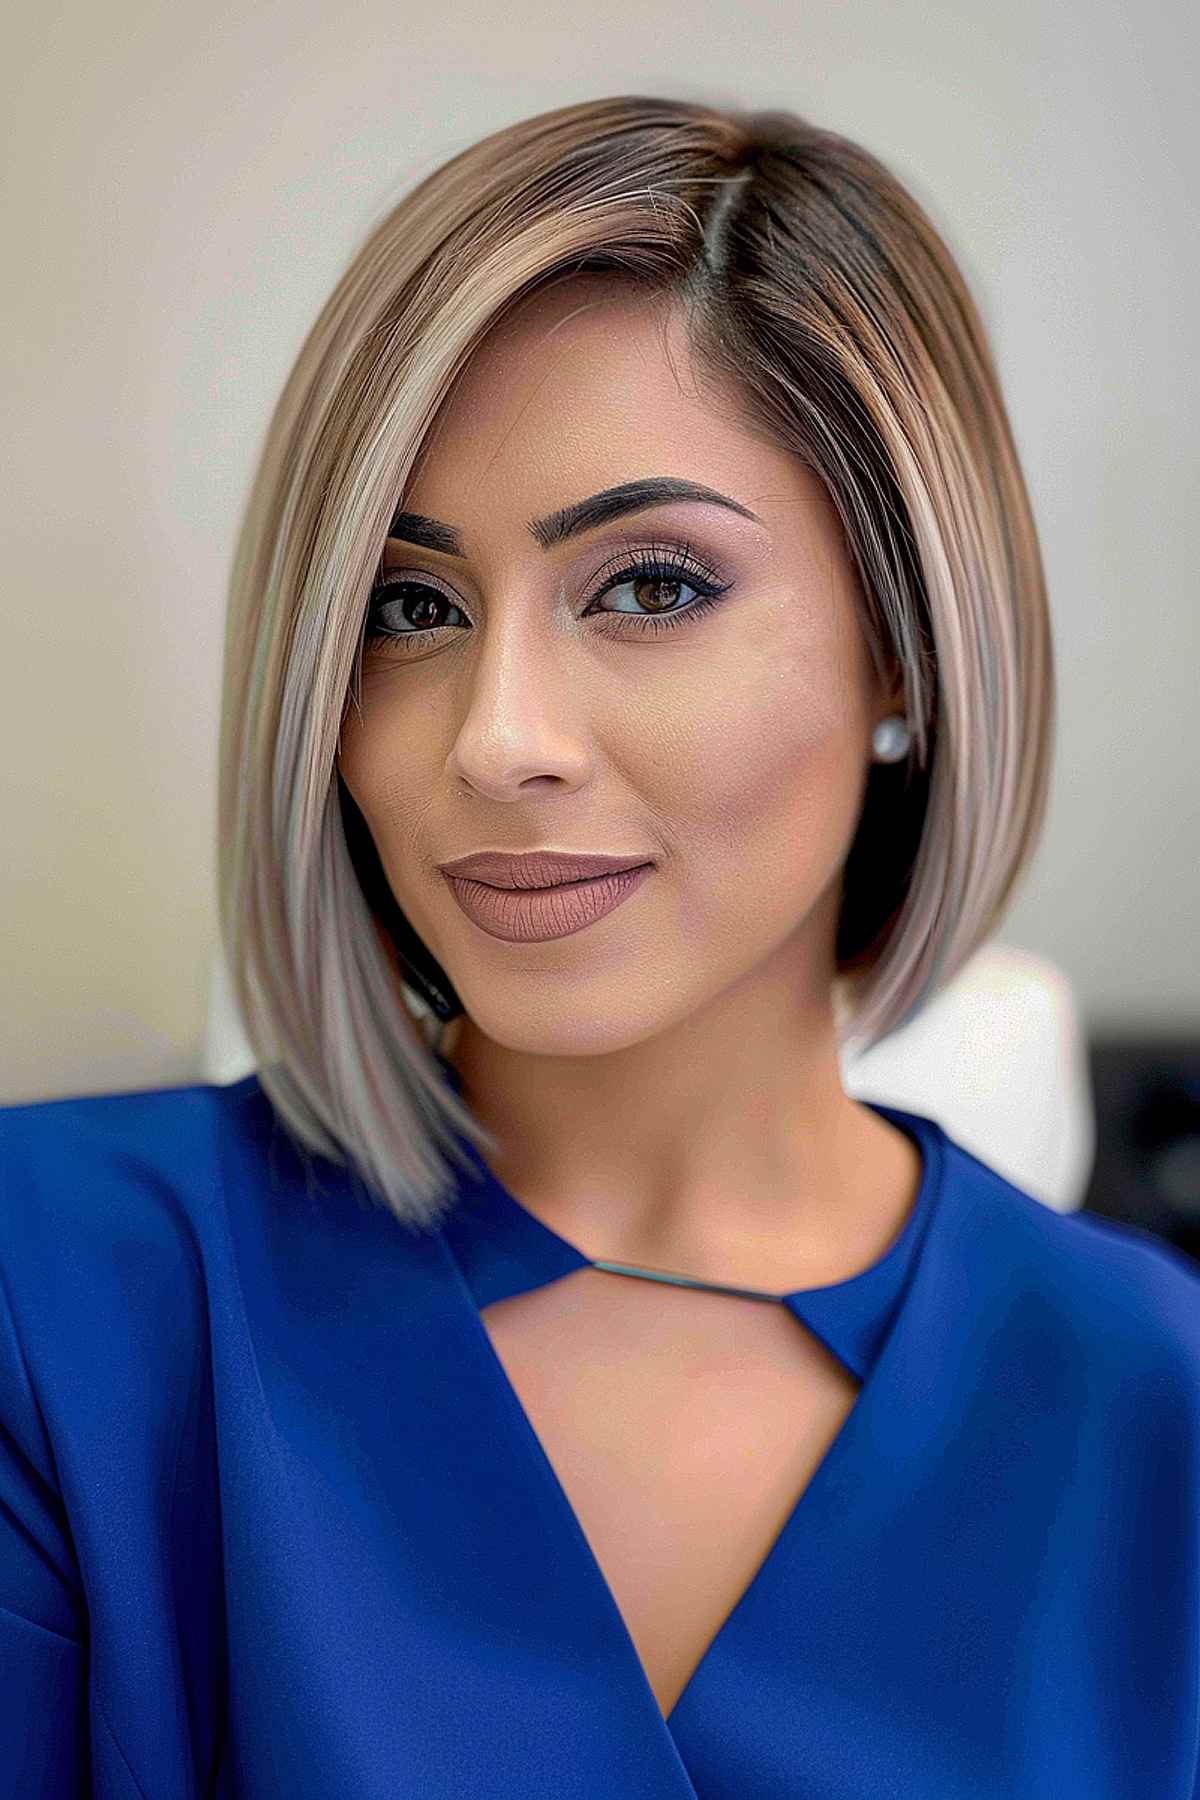 Asymmetrical bob with deep side part and ash blonde color with darker roots, ideal for straight, fine to medium hair.